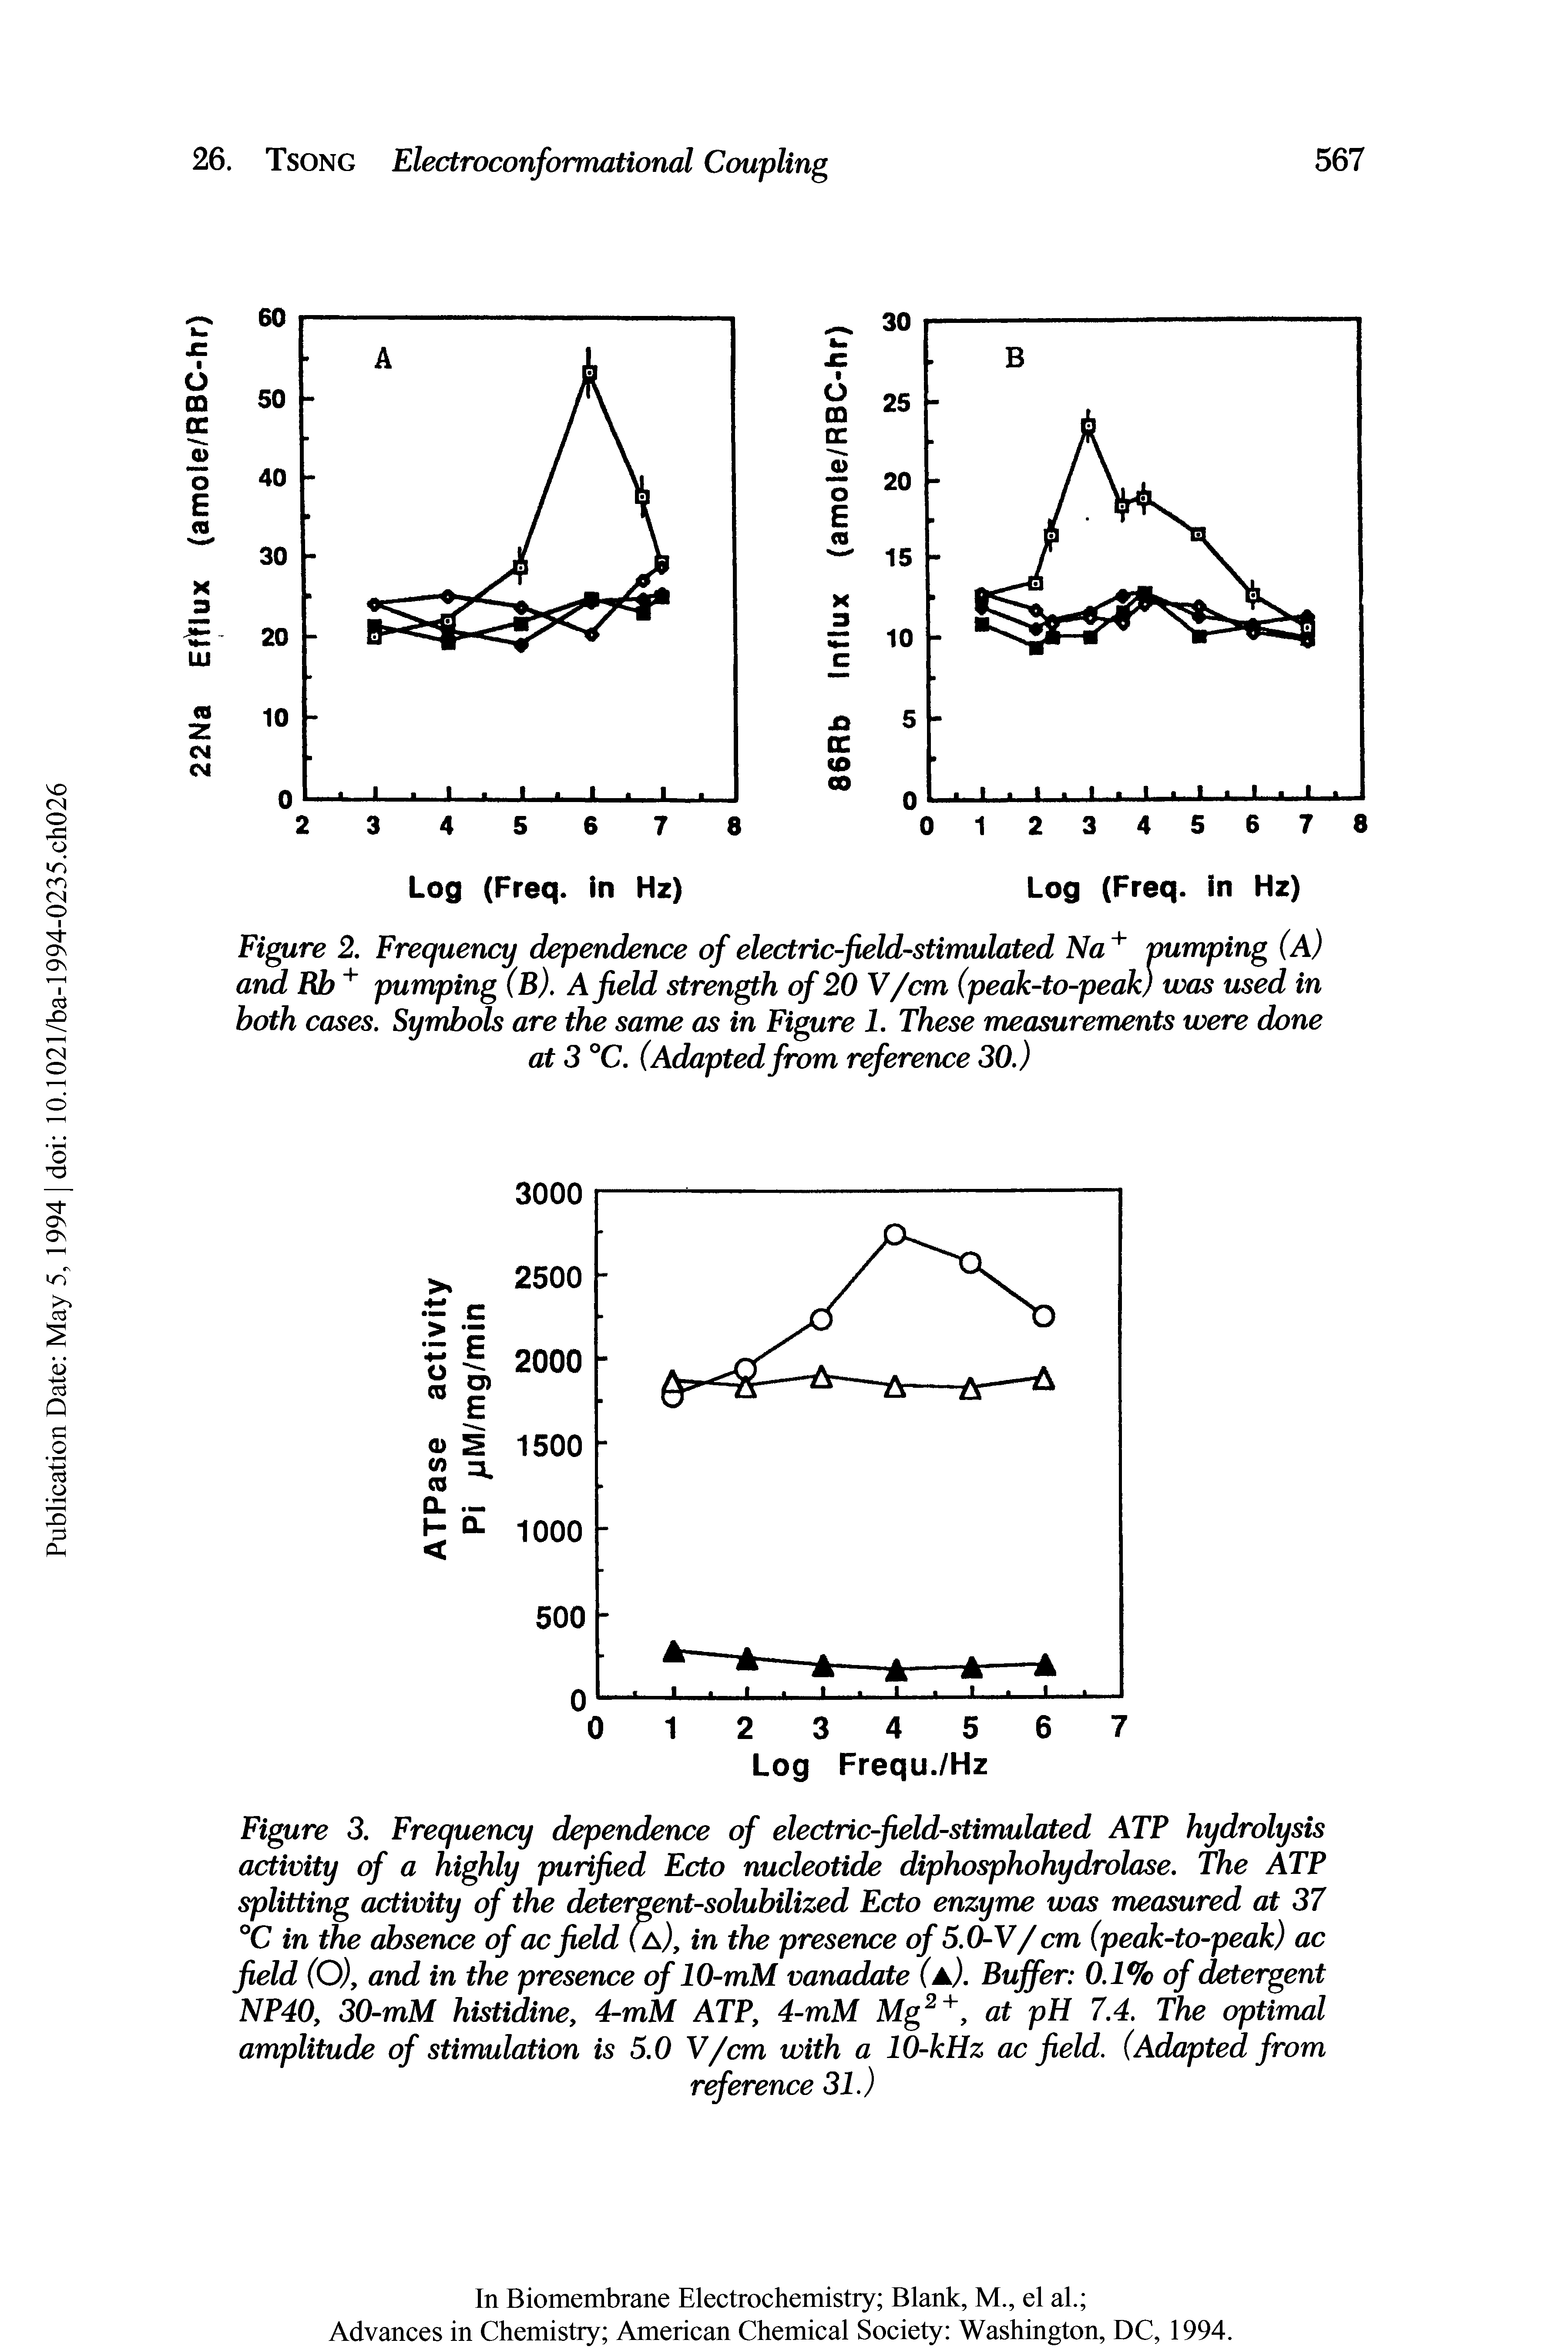 Figure 2. Frequency dependence of electric-field-stimulated Na + pumping (A) and Rb + pumping (B). Afield strength of 20 V/cm (peak-to-peak) was used in both cases. Symbols are the same as in Figure 1. These measurements were done at 3 °C. (Adapted from reference 30.)...